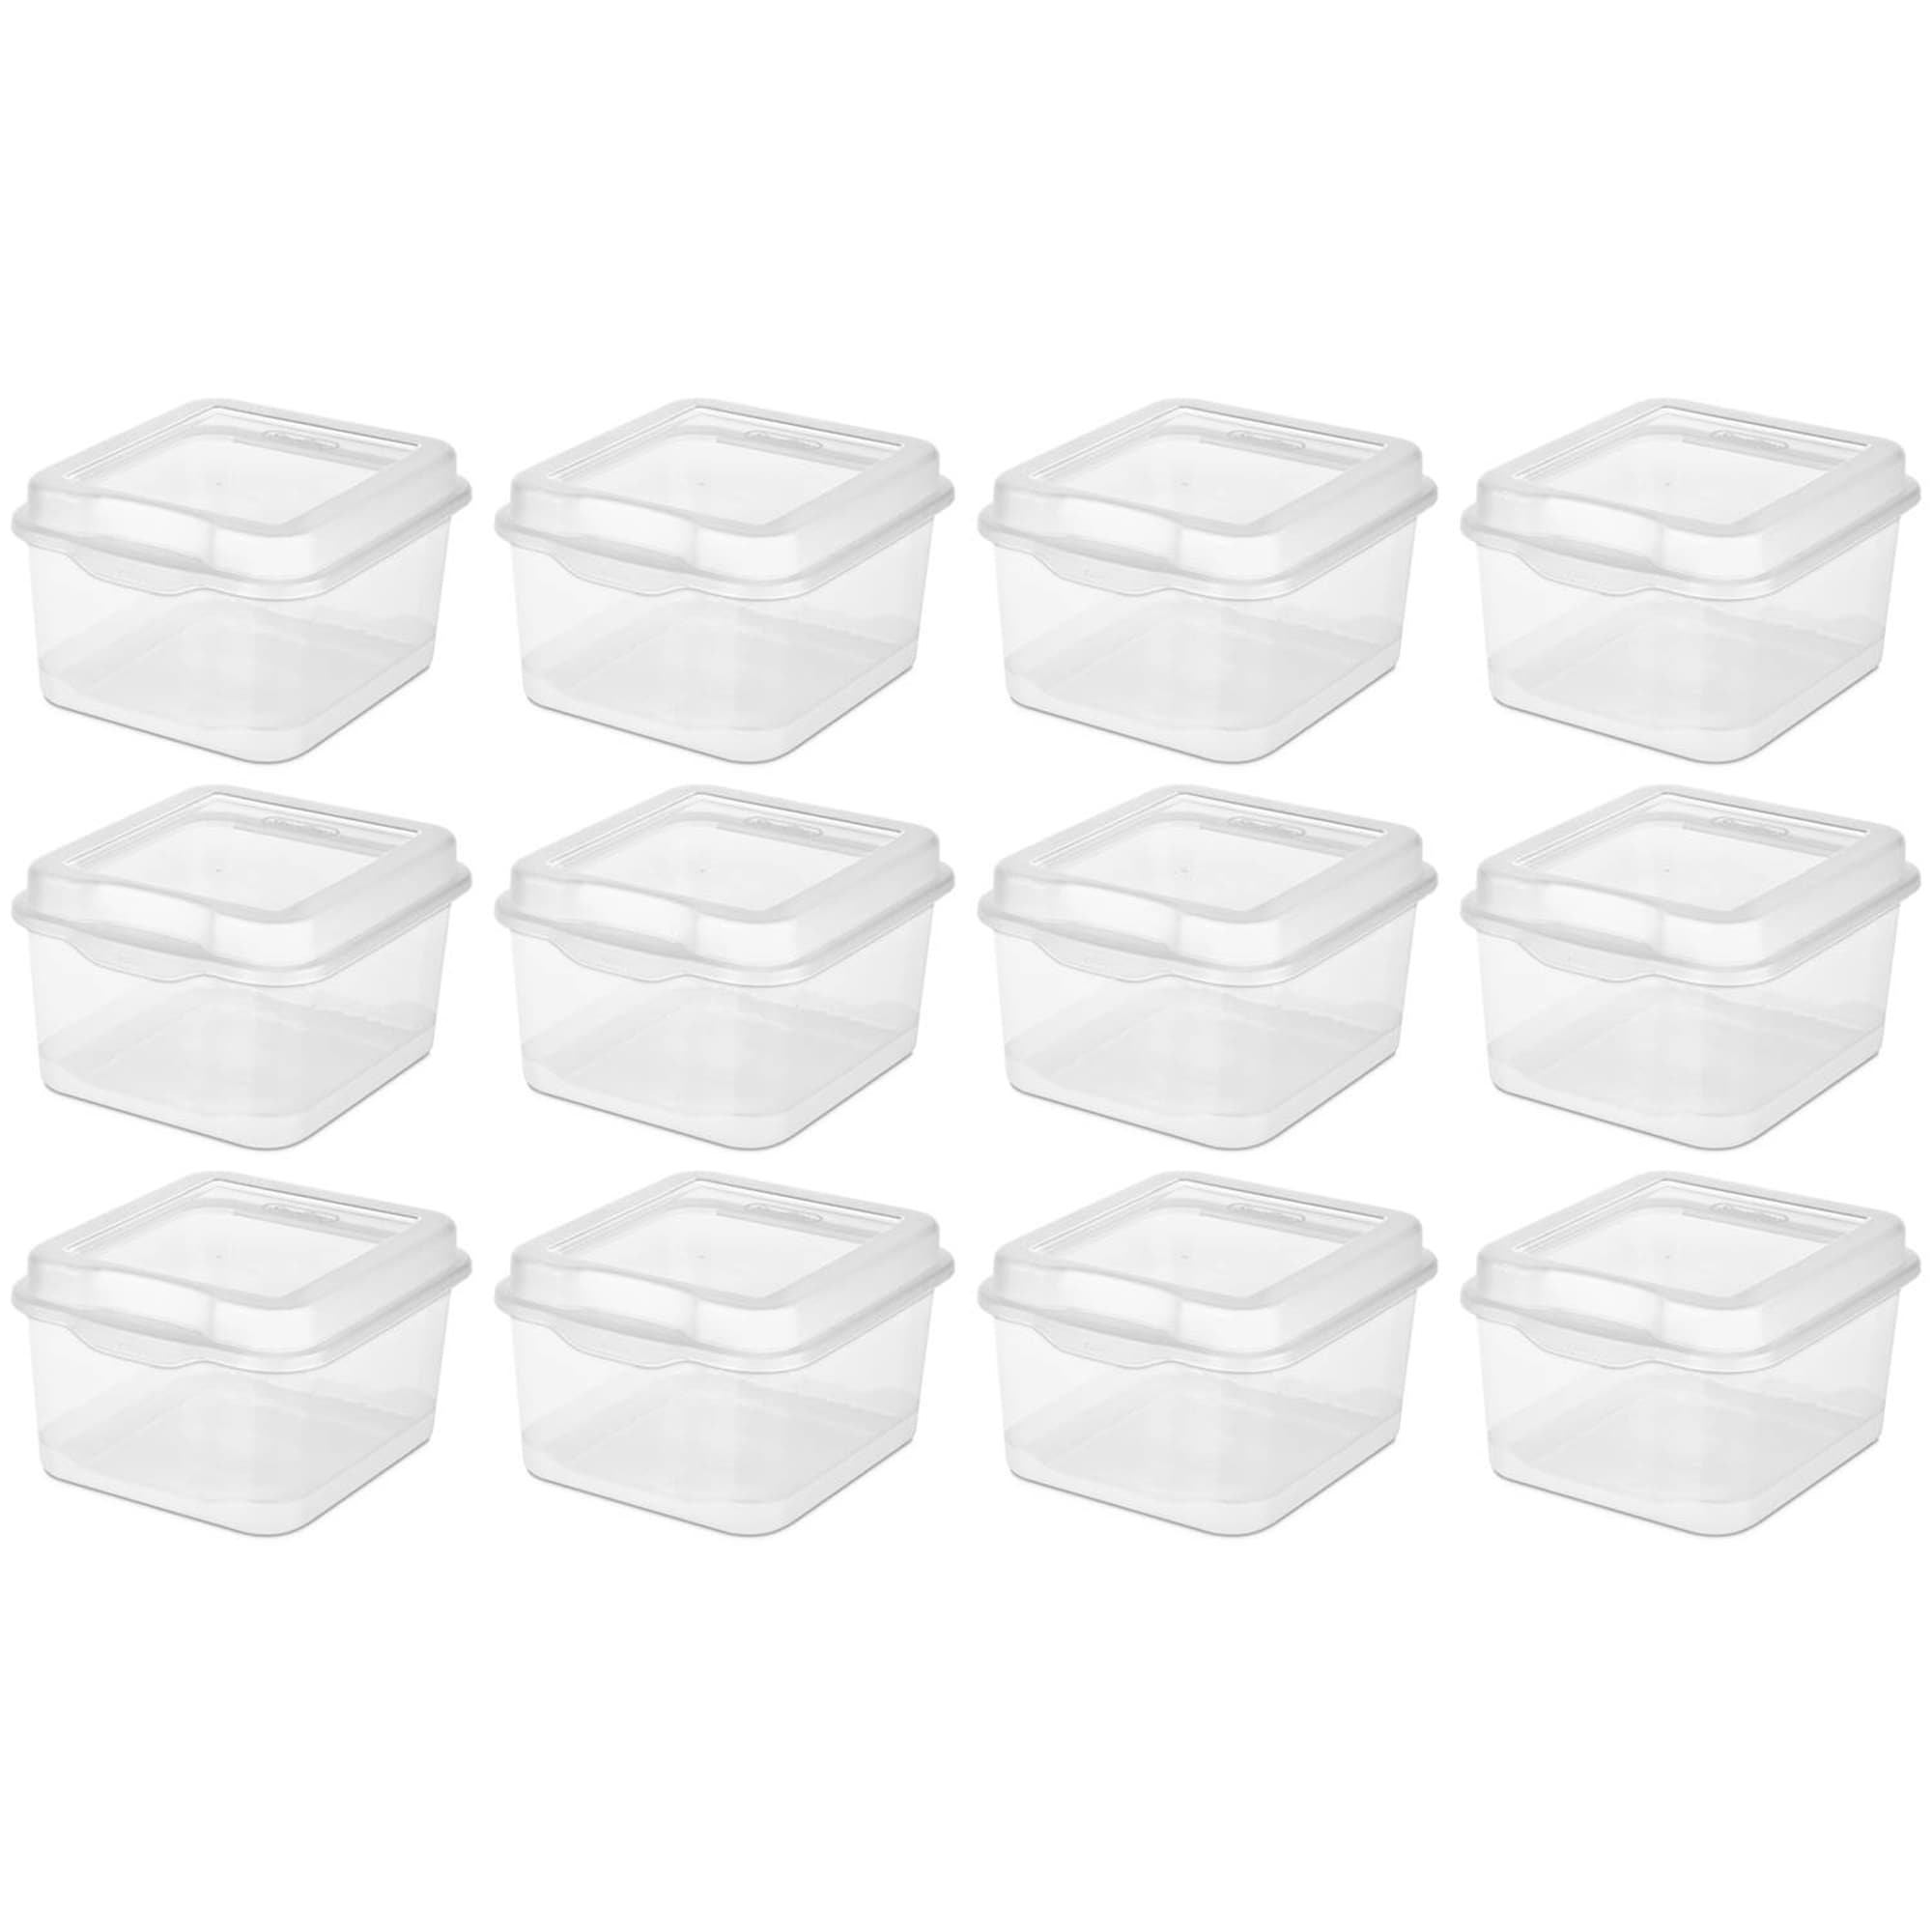 https://ak1.ostkcdn.com/images/products/is/images/direct/33676575832e716c0b27653ee7d13a32b8eb38b5/Sterilite-Plastic-FlipTop-Hinged-Storage-Box-Container-w--Latching-Lid-%2812-Pack%29.jpg